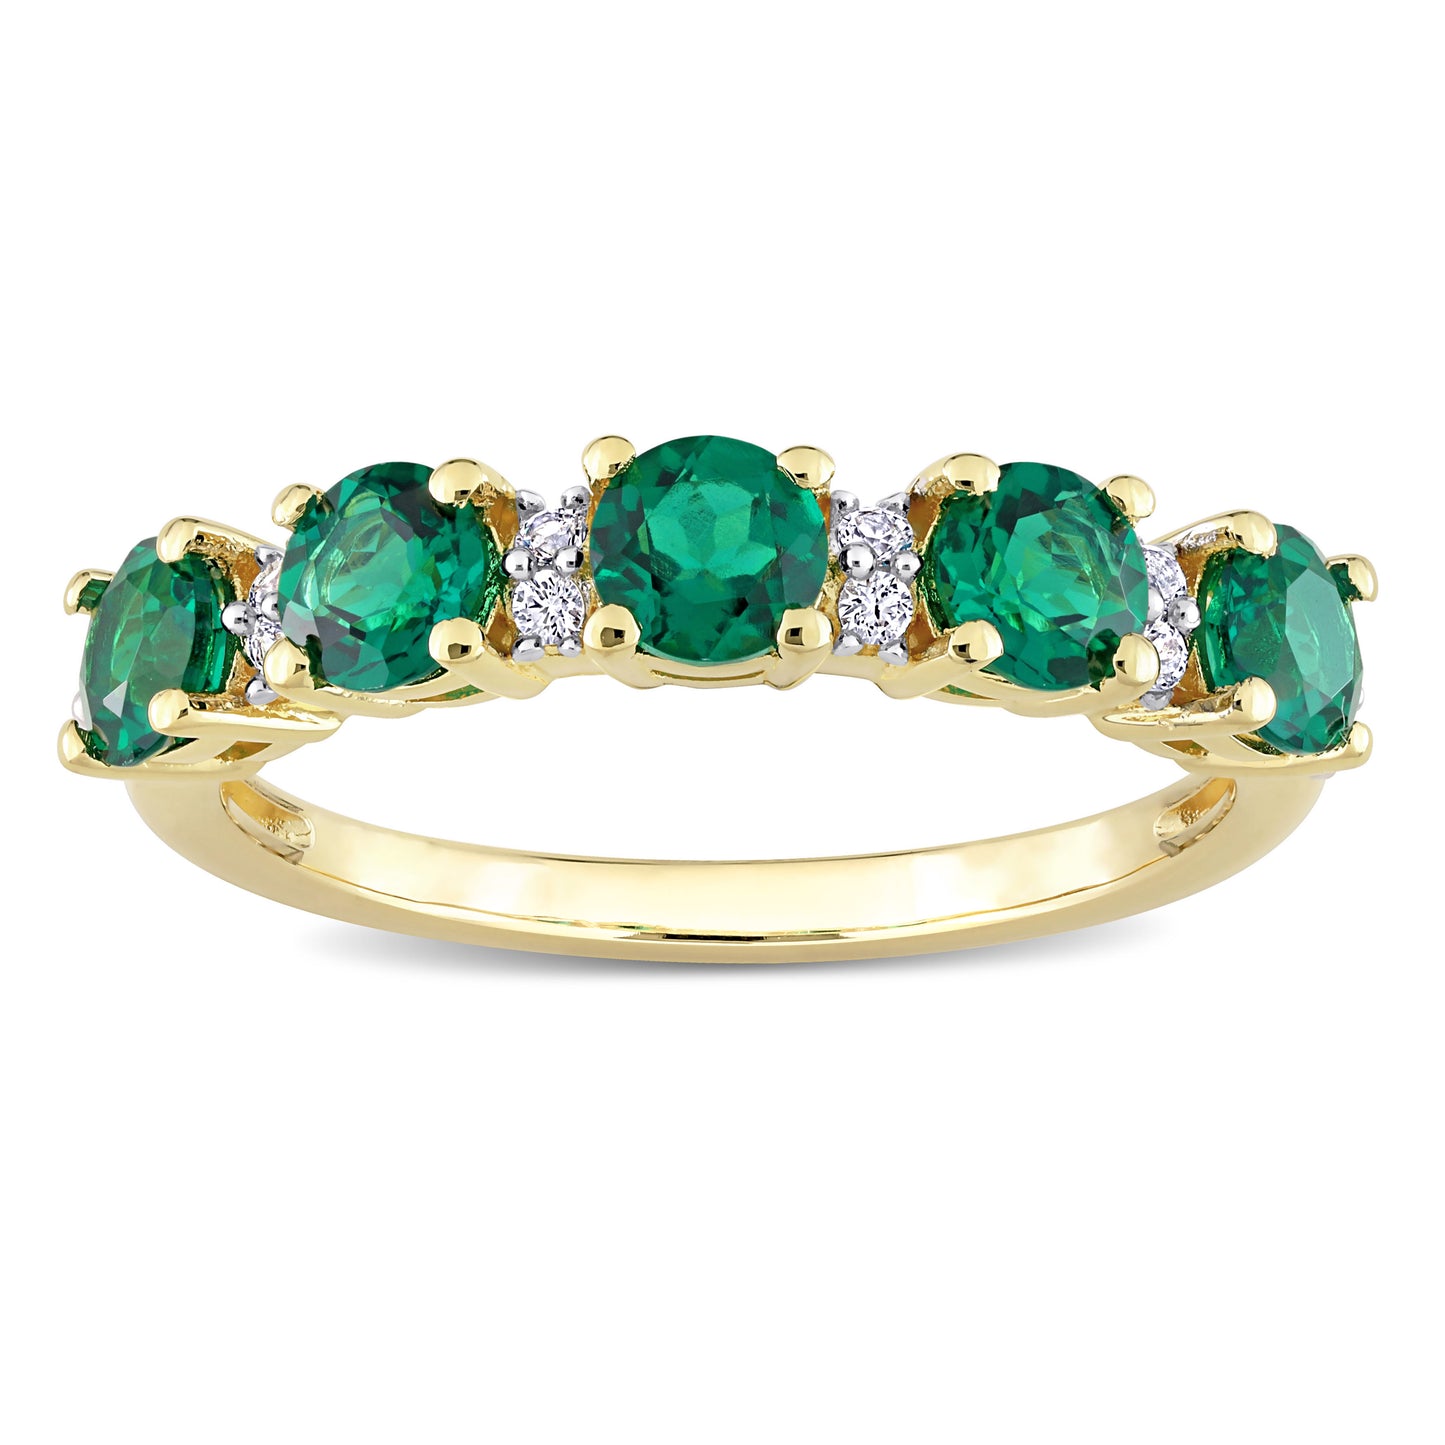 Emerald & White Sapphire Ring Yellow Sterling Silver